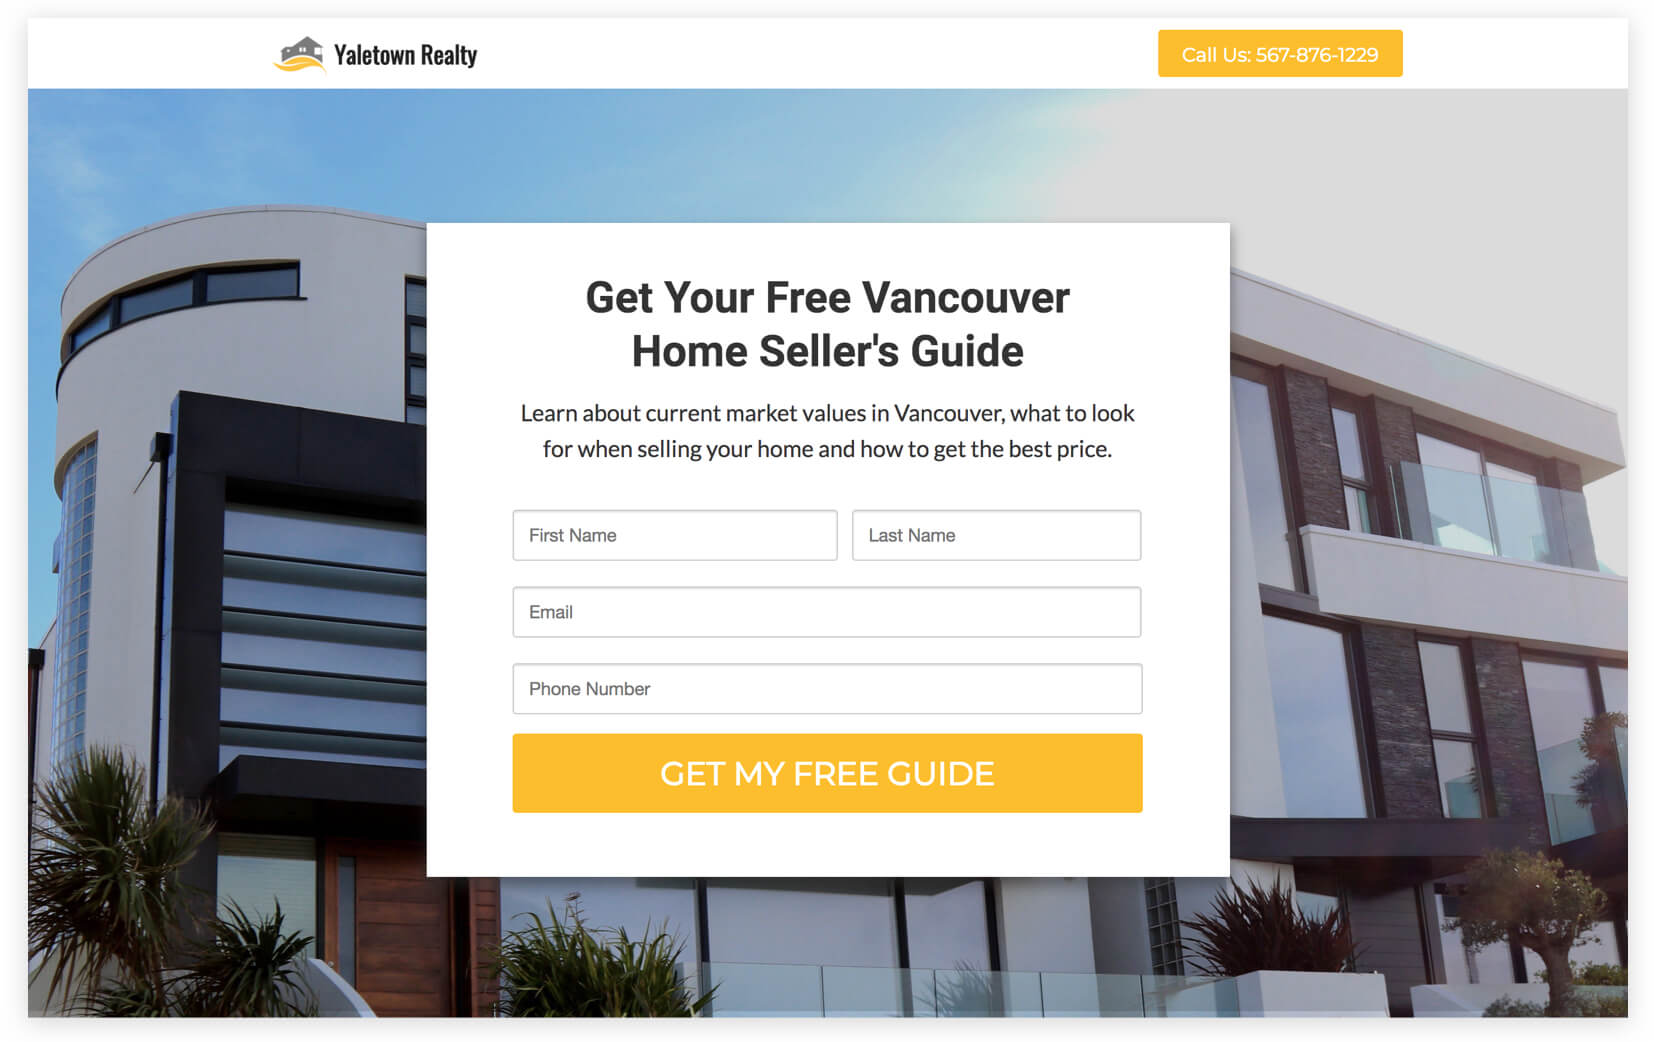 10-best-real-estate-landing-page-examples-that-increase-sales